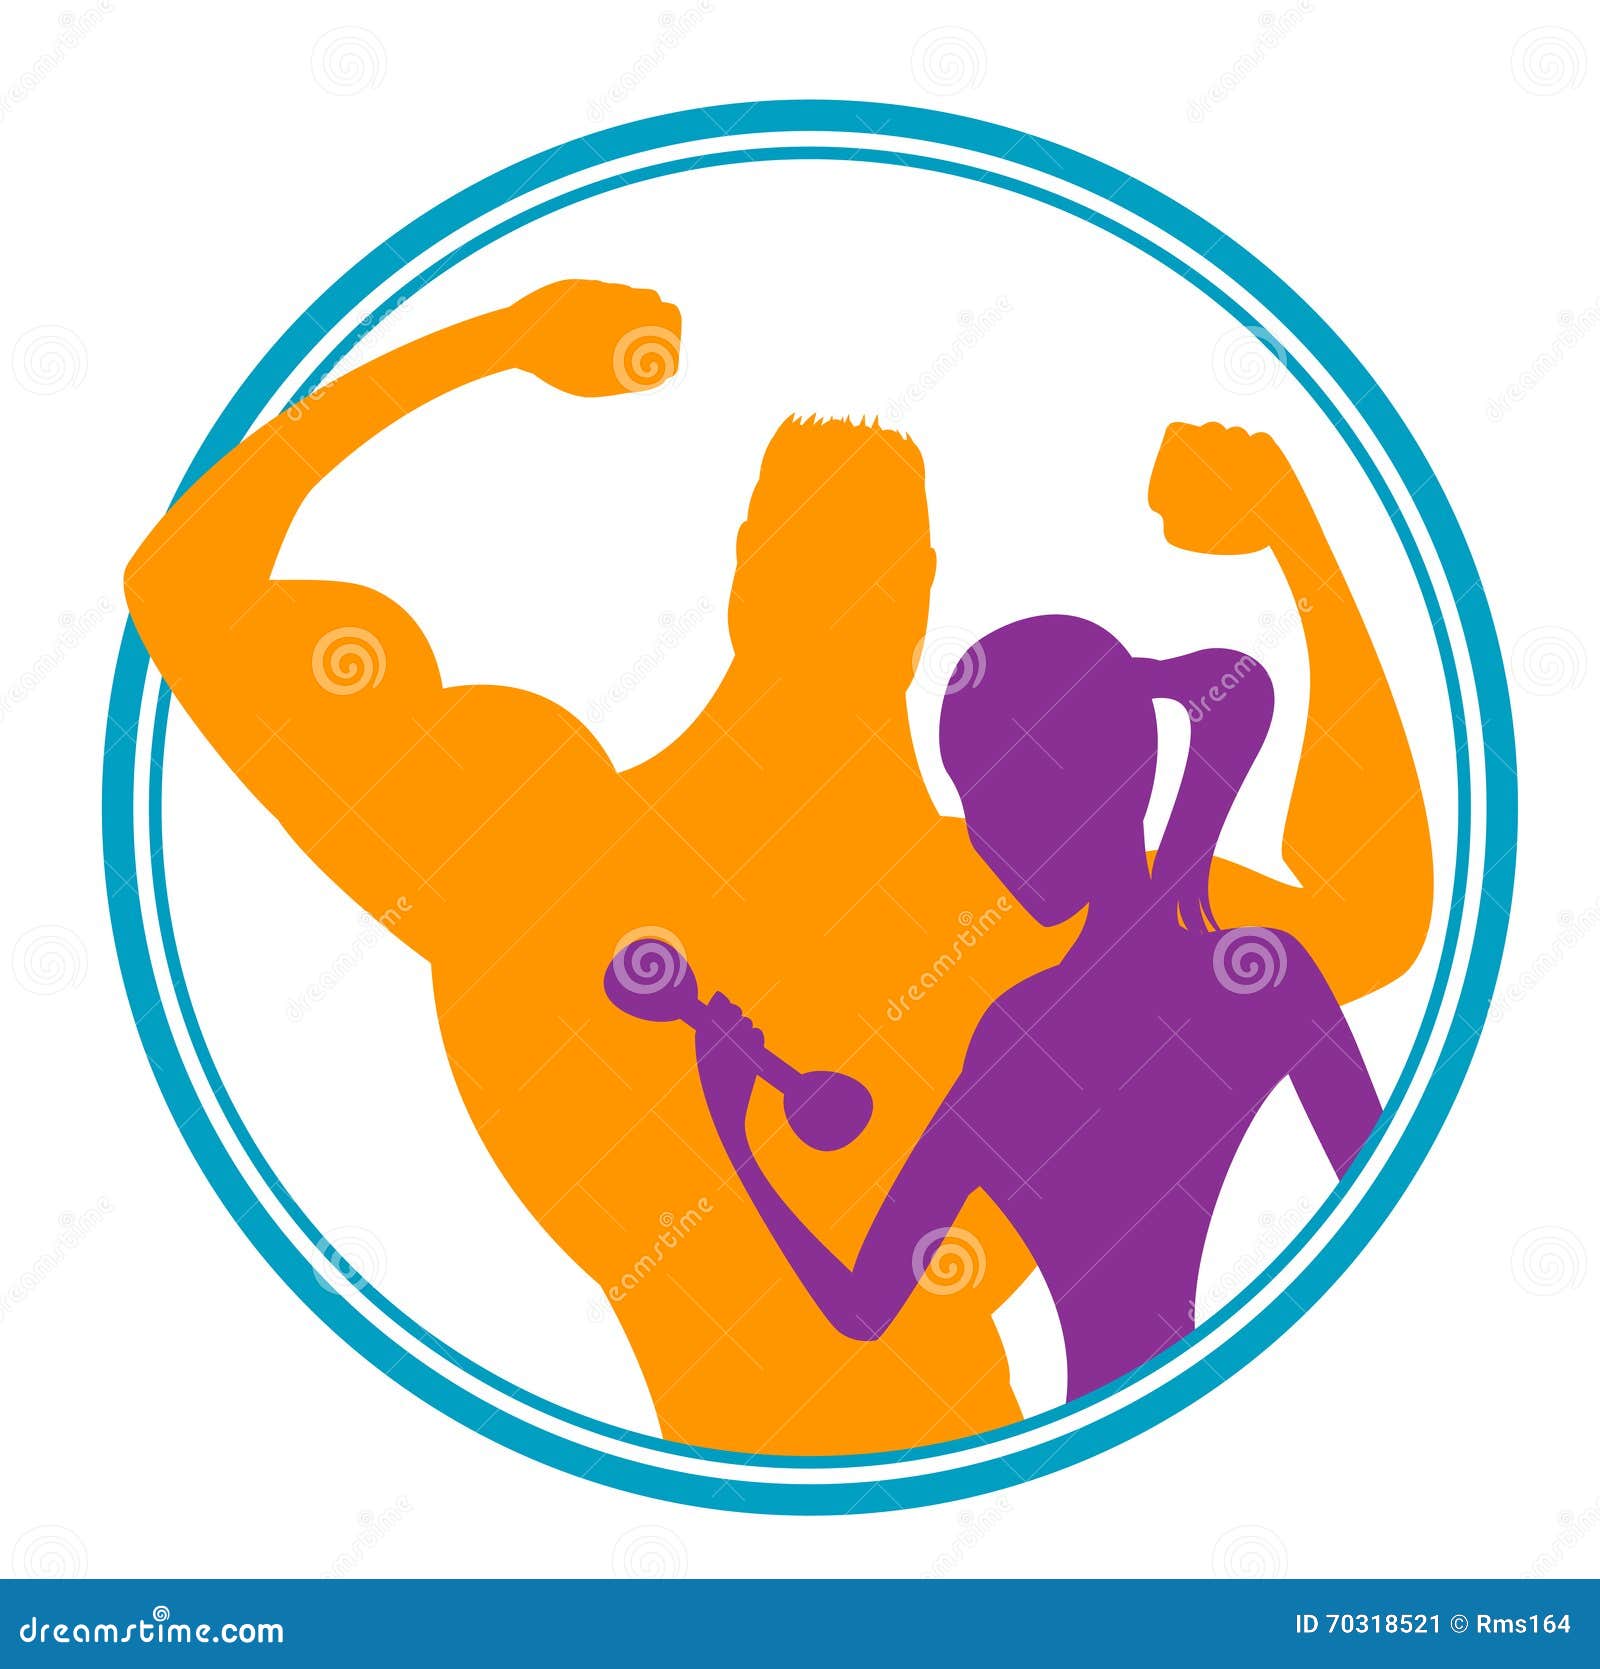 Fitness Club Logo Or Emblem With Woman And Man Silhouettes